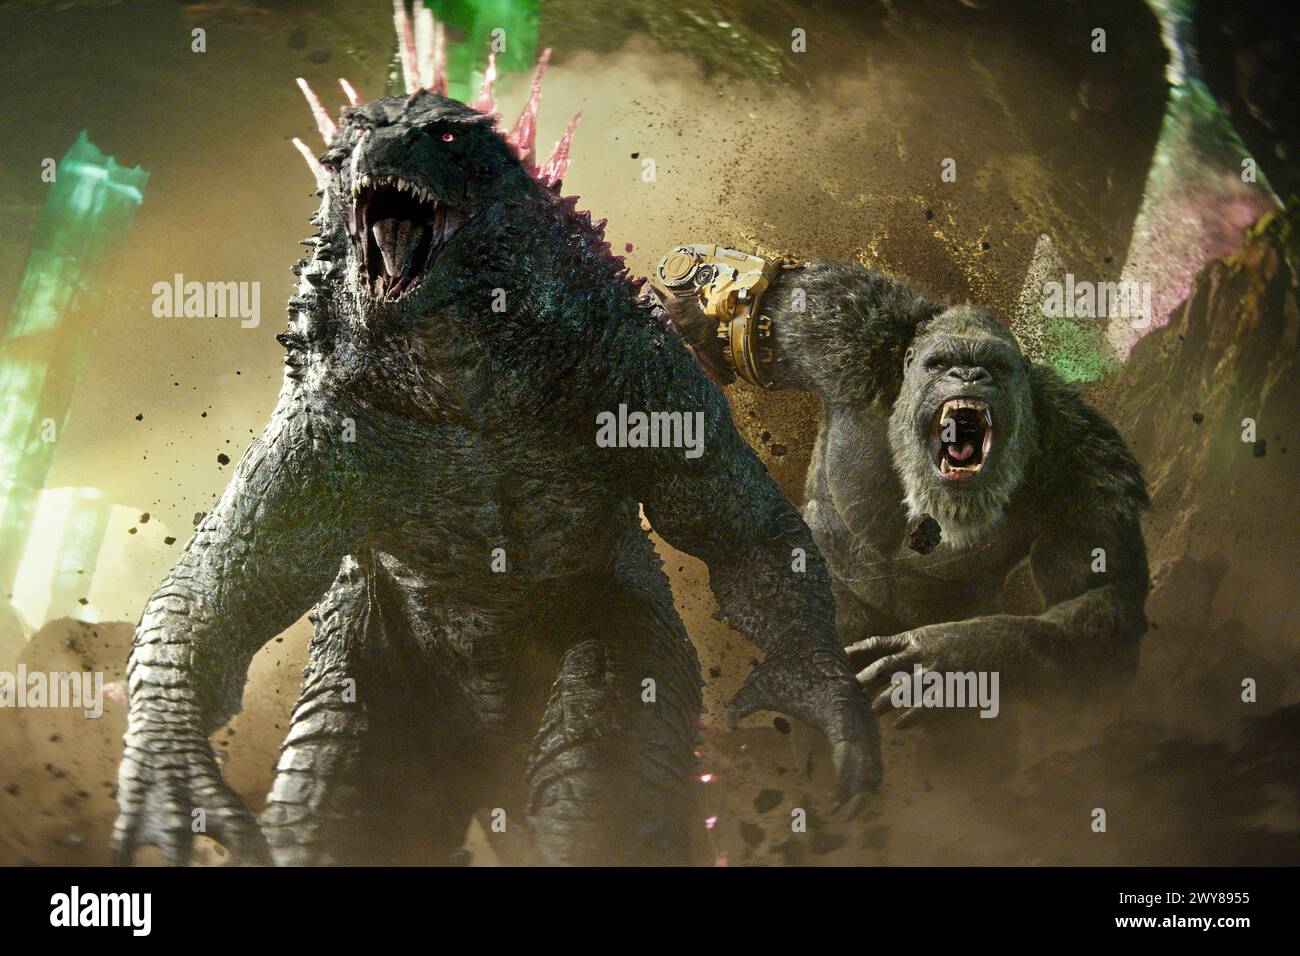 Godzilla x Kong: The New Empire (2024) directed by Adam Wingard and starring Rebecca Hall, Brian Tyree Henry and Dan Stevens. Two ancient titans, Godzilla and Kong, clash in an epic battle as humans unravel their intertwined origins and connection to Skull Island's mysteries. Publicity still.***EDITORIAL USE ONLY*** Credit: BFA / Warner Bros Stock Photo